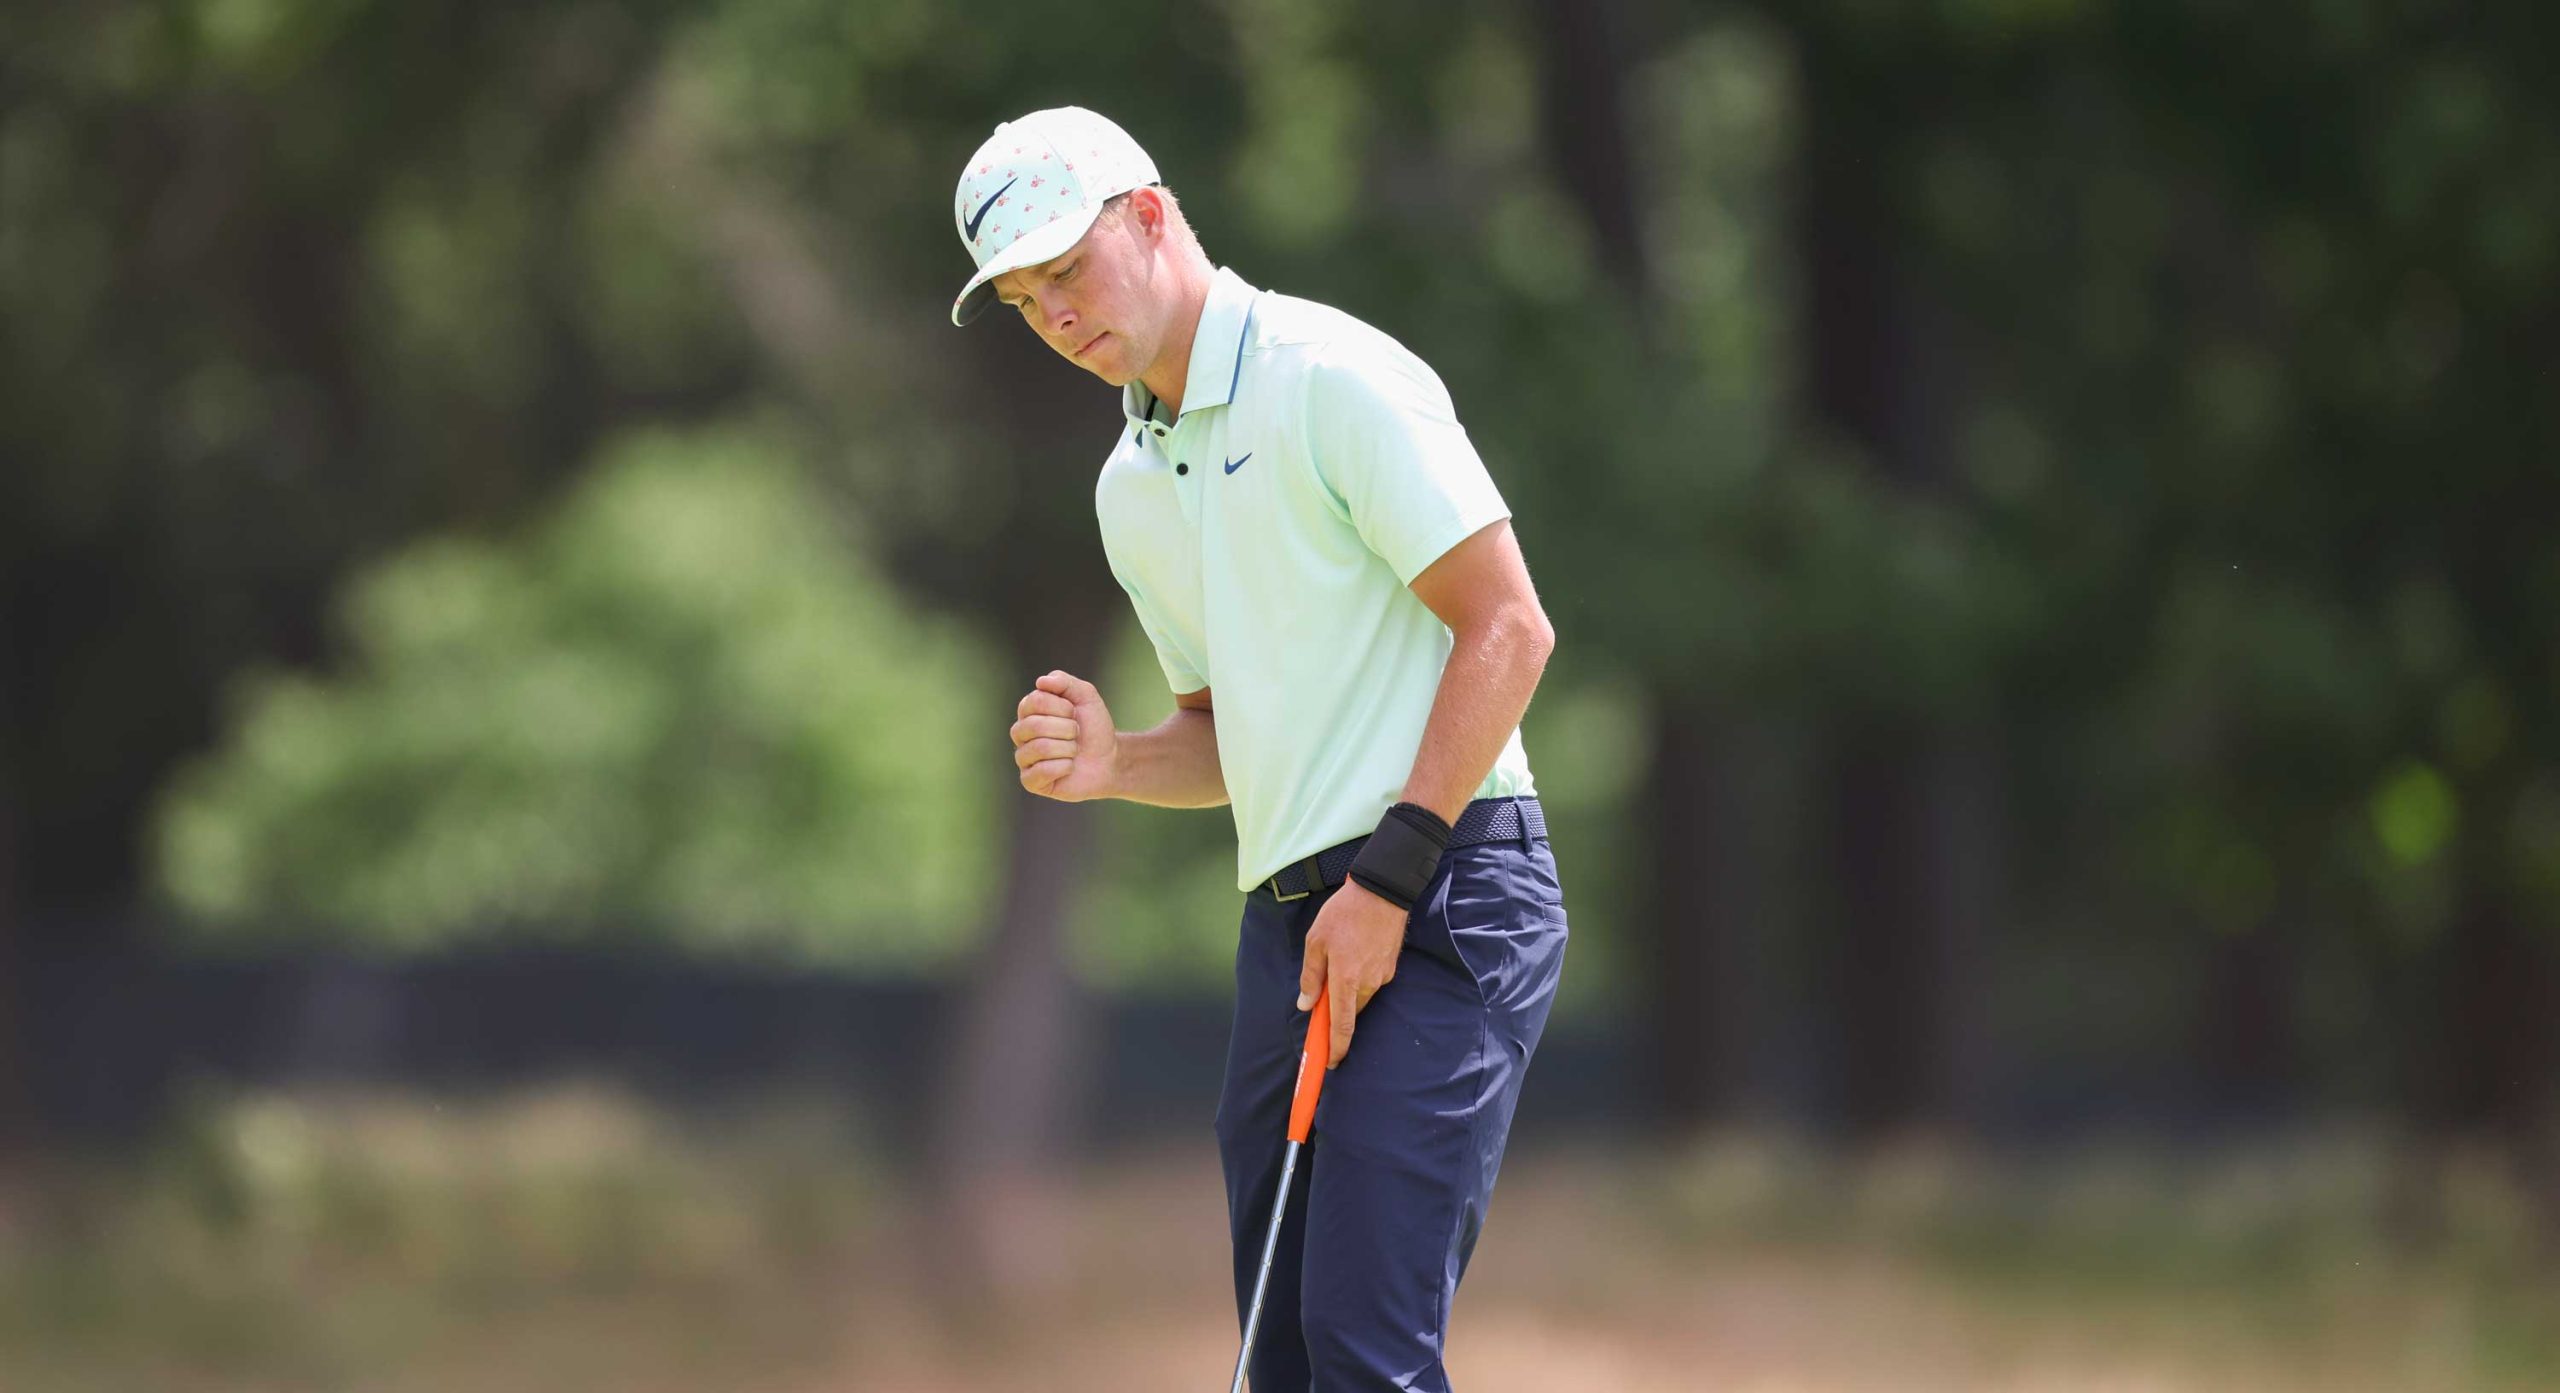 Nick Hardy Sees Summer Run of Success as “an investment” in His PGA TOUR Future